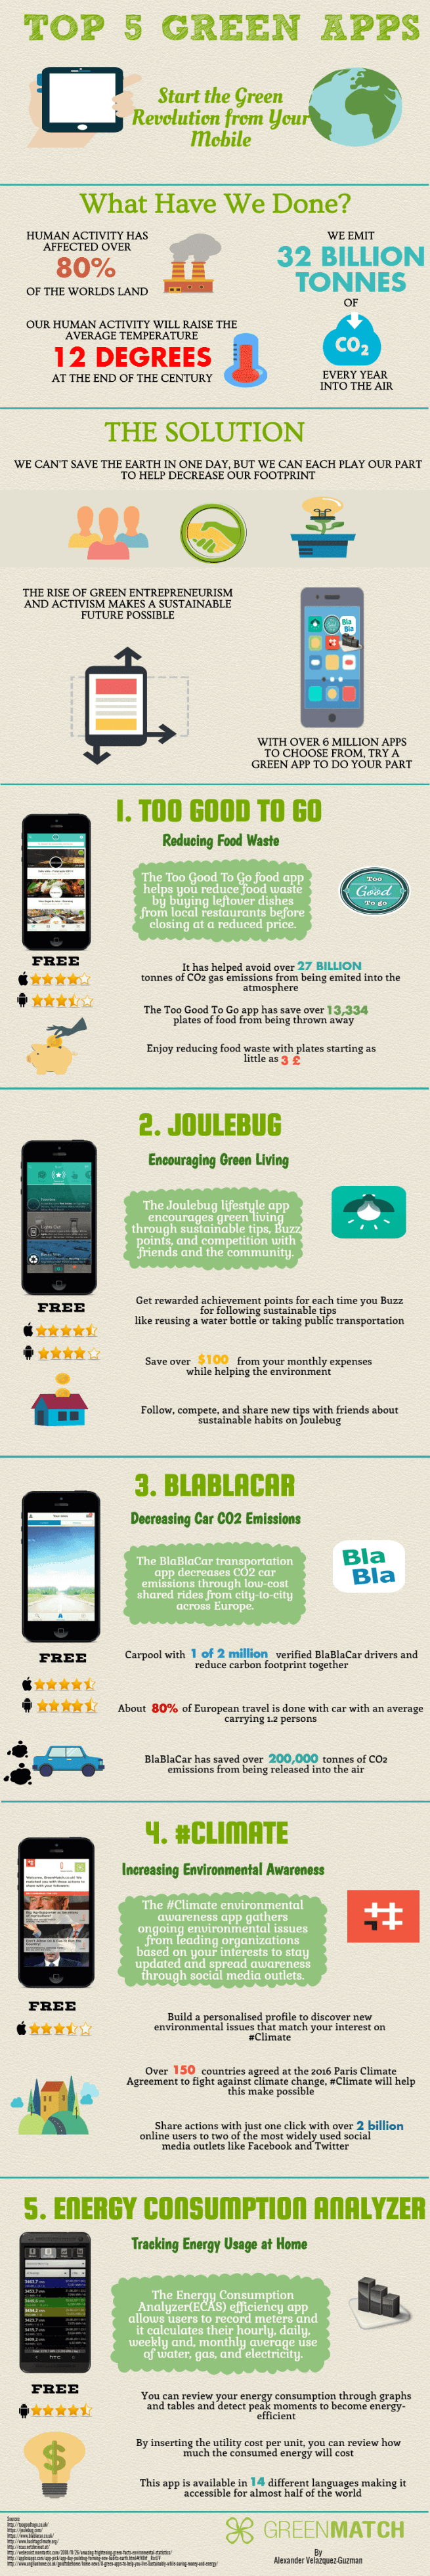 Infographic about top 5 green apps